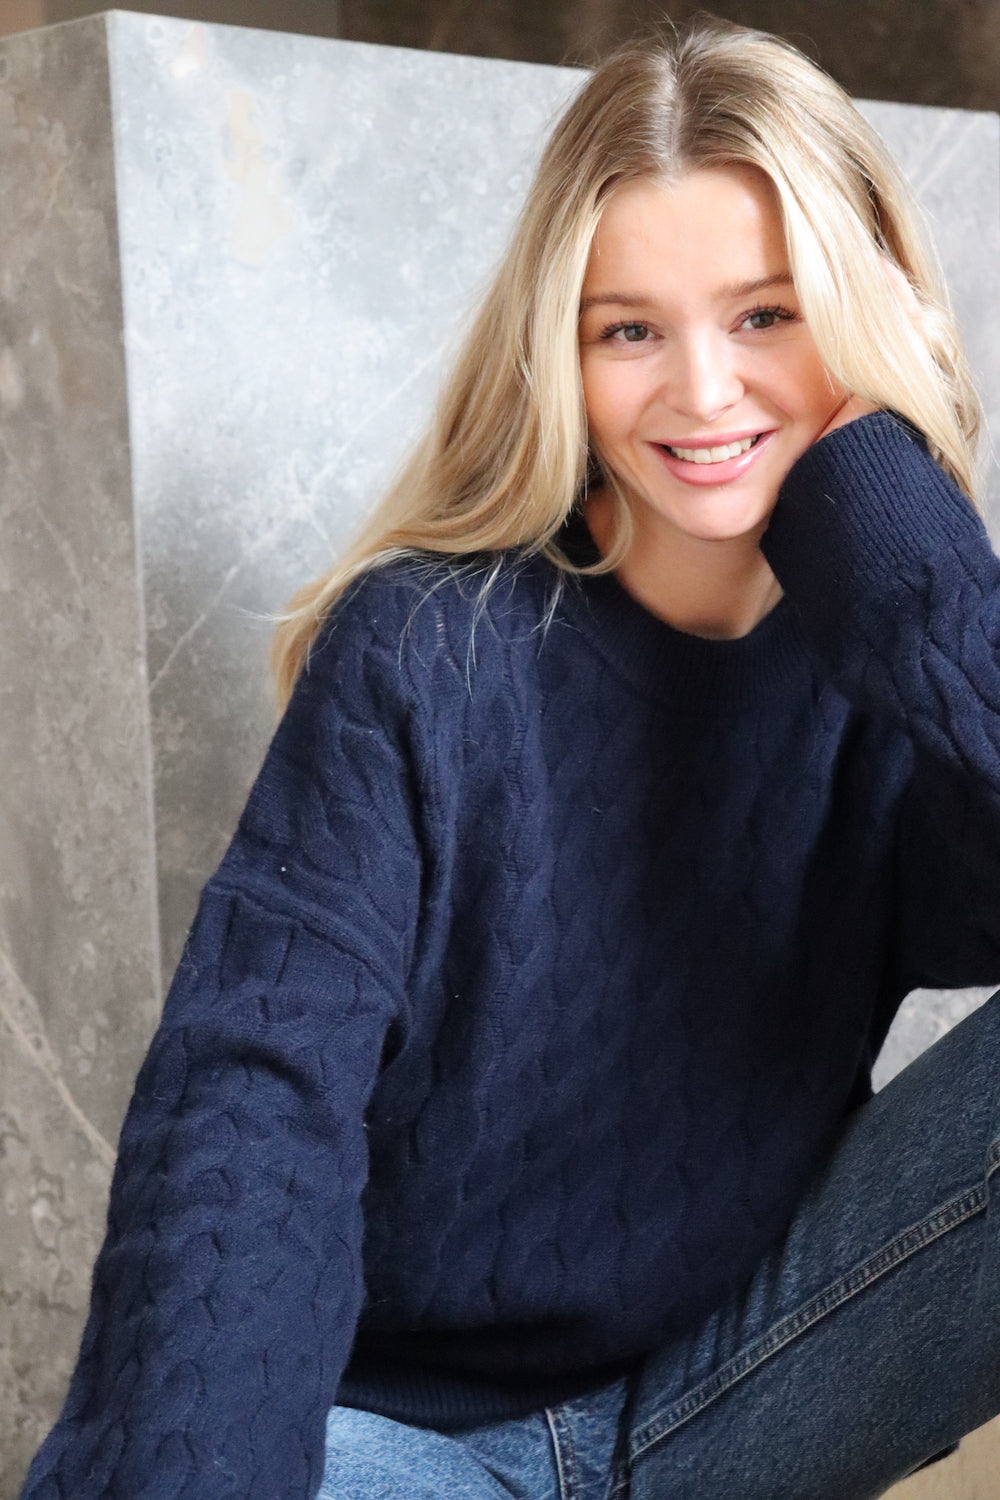 O'TAY Eline Sweater Blouses Midnight Navy